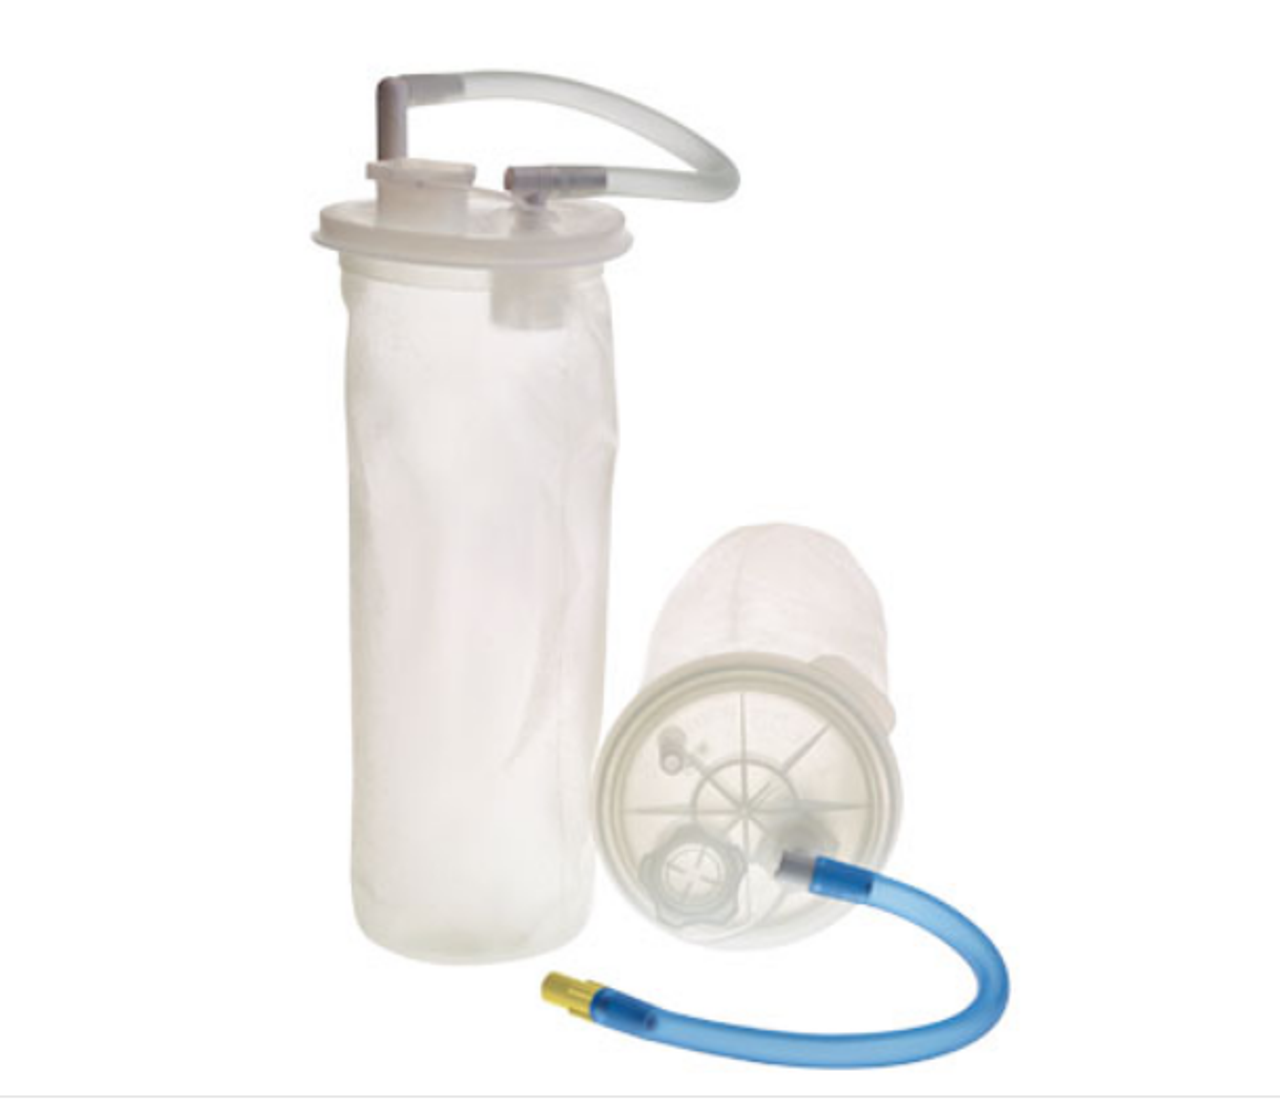 CANISTER SUCTION REUSEABLE 2000ml USE w/RECEPTAL LINER CA/10 QCONLY C 263-PM2-4344501